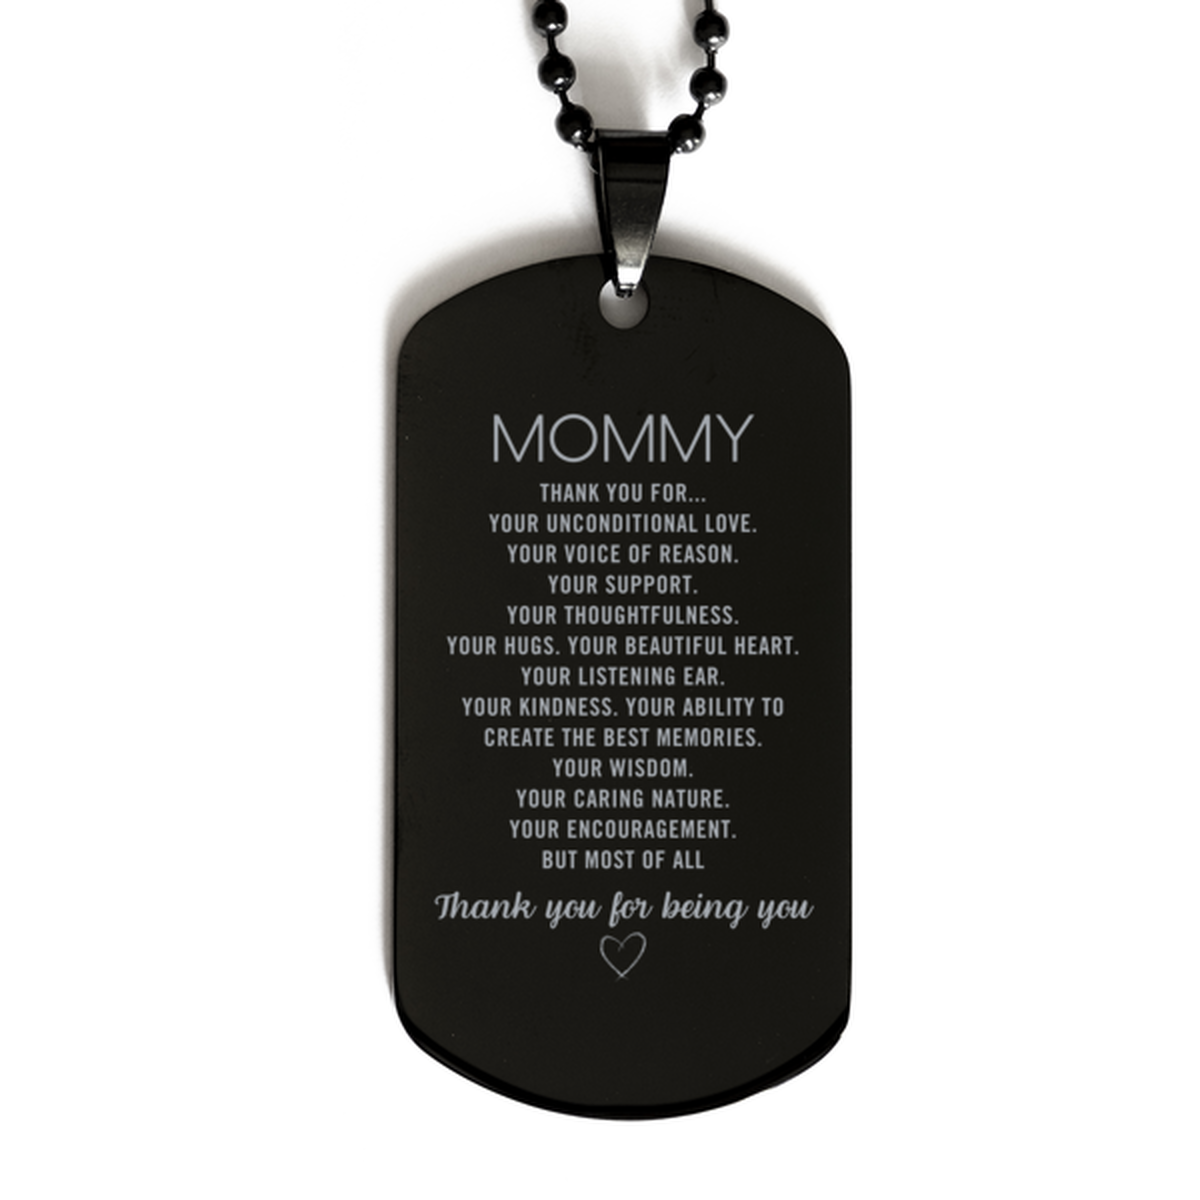 Mommy Black Dog Tag Custom, Engraved Gifts For Mommy Christmas Graduation Birthday Gifts for Men Women Mommy Thank you for Your unconditional love